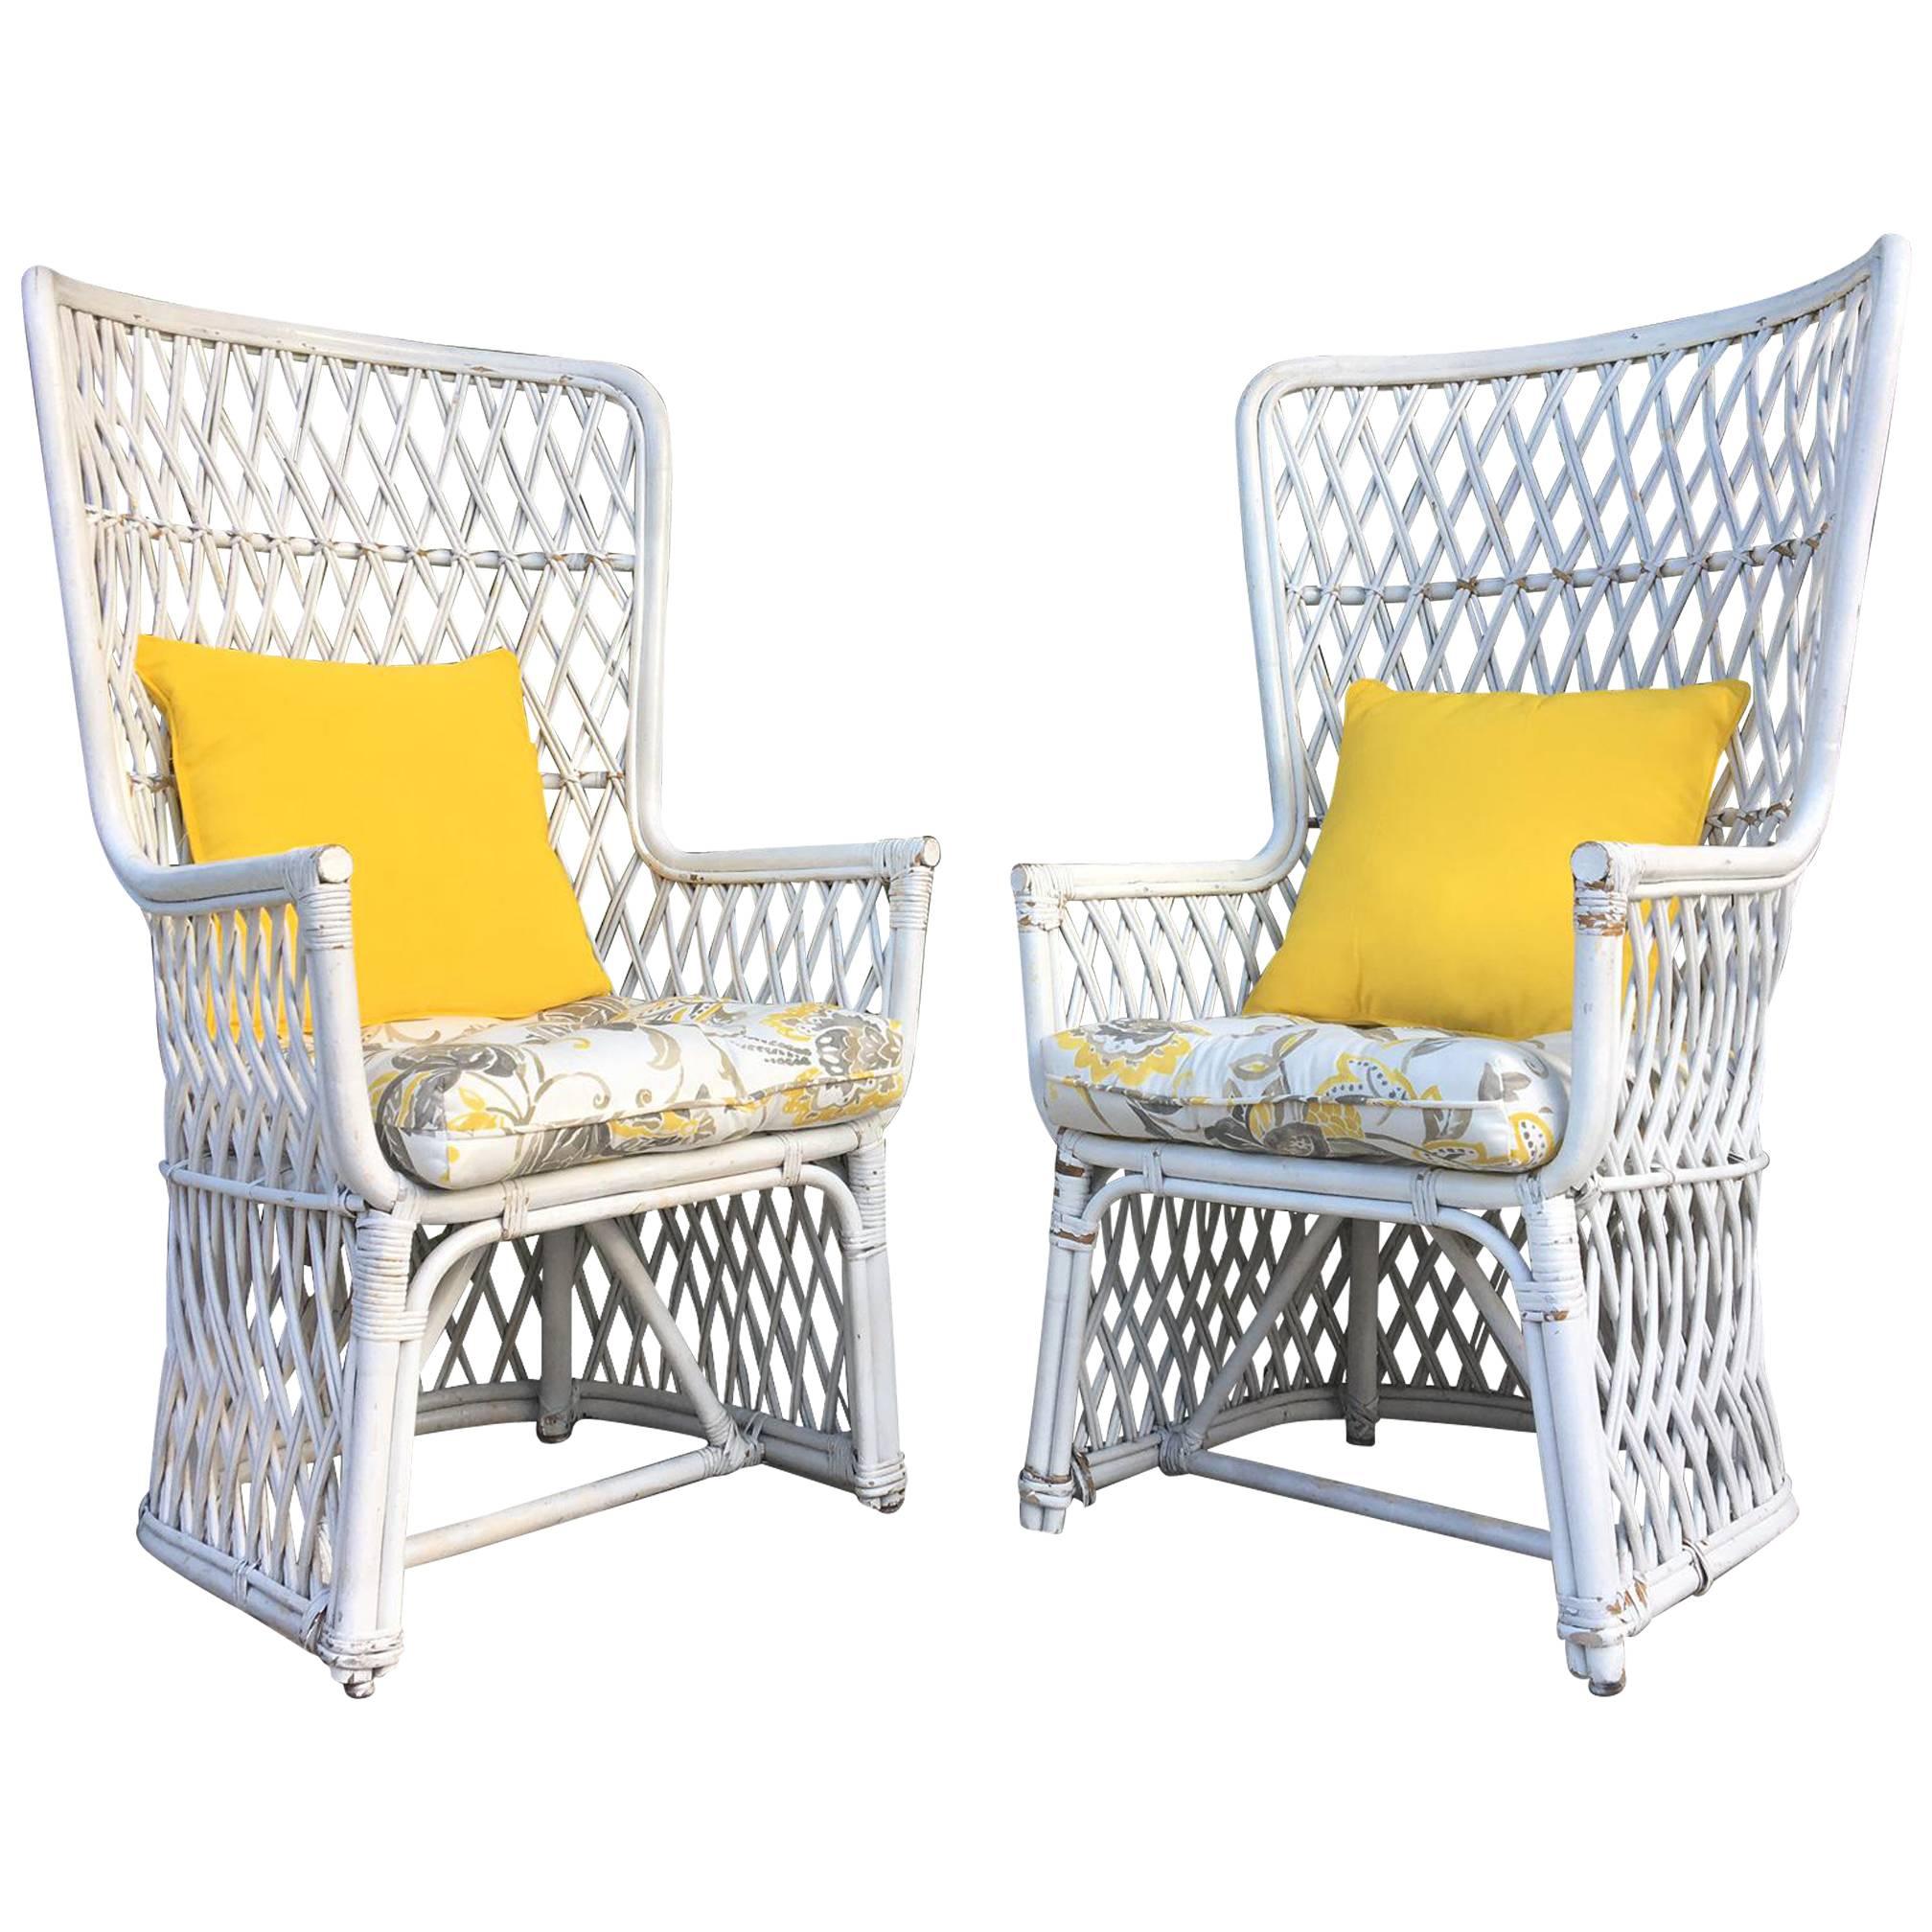 Pair of Vintage Wicker High Back Throne Chairs